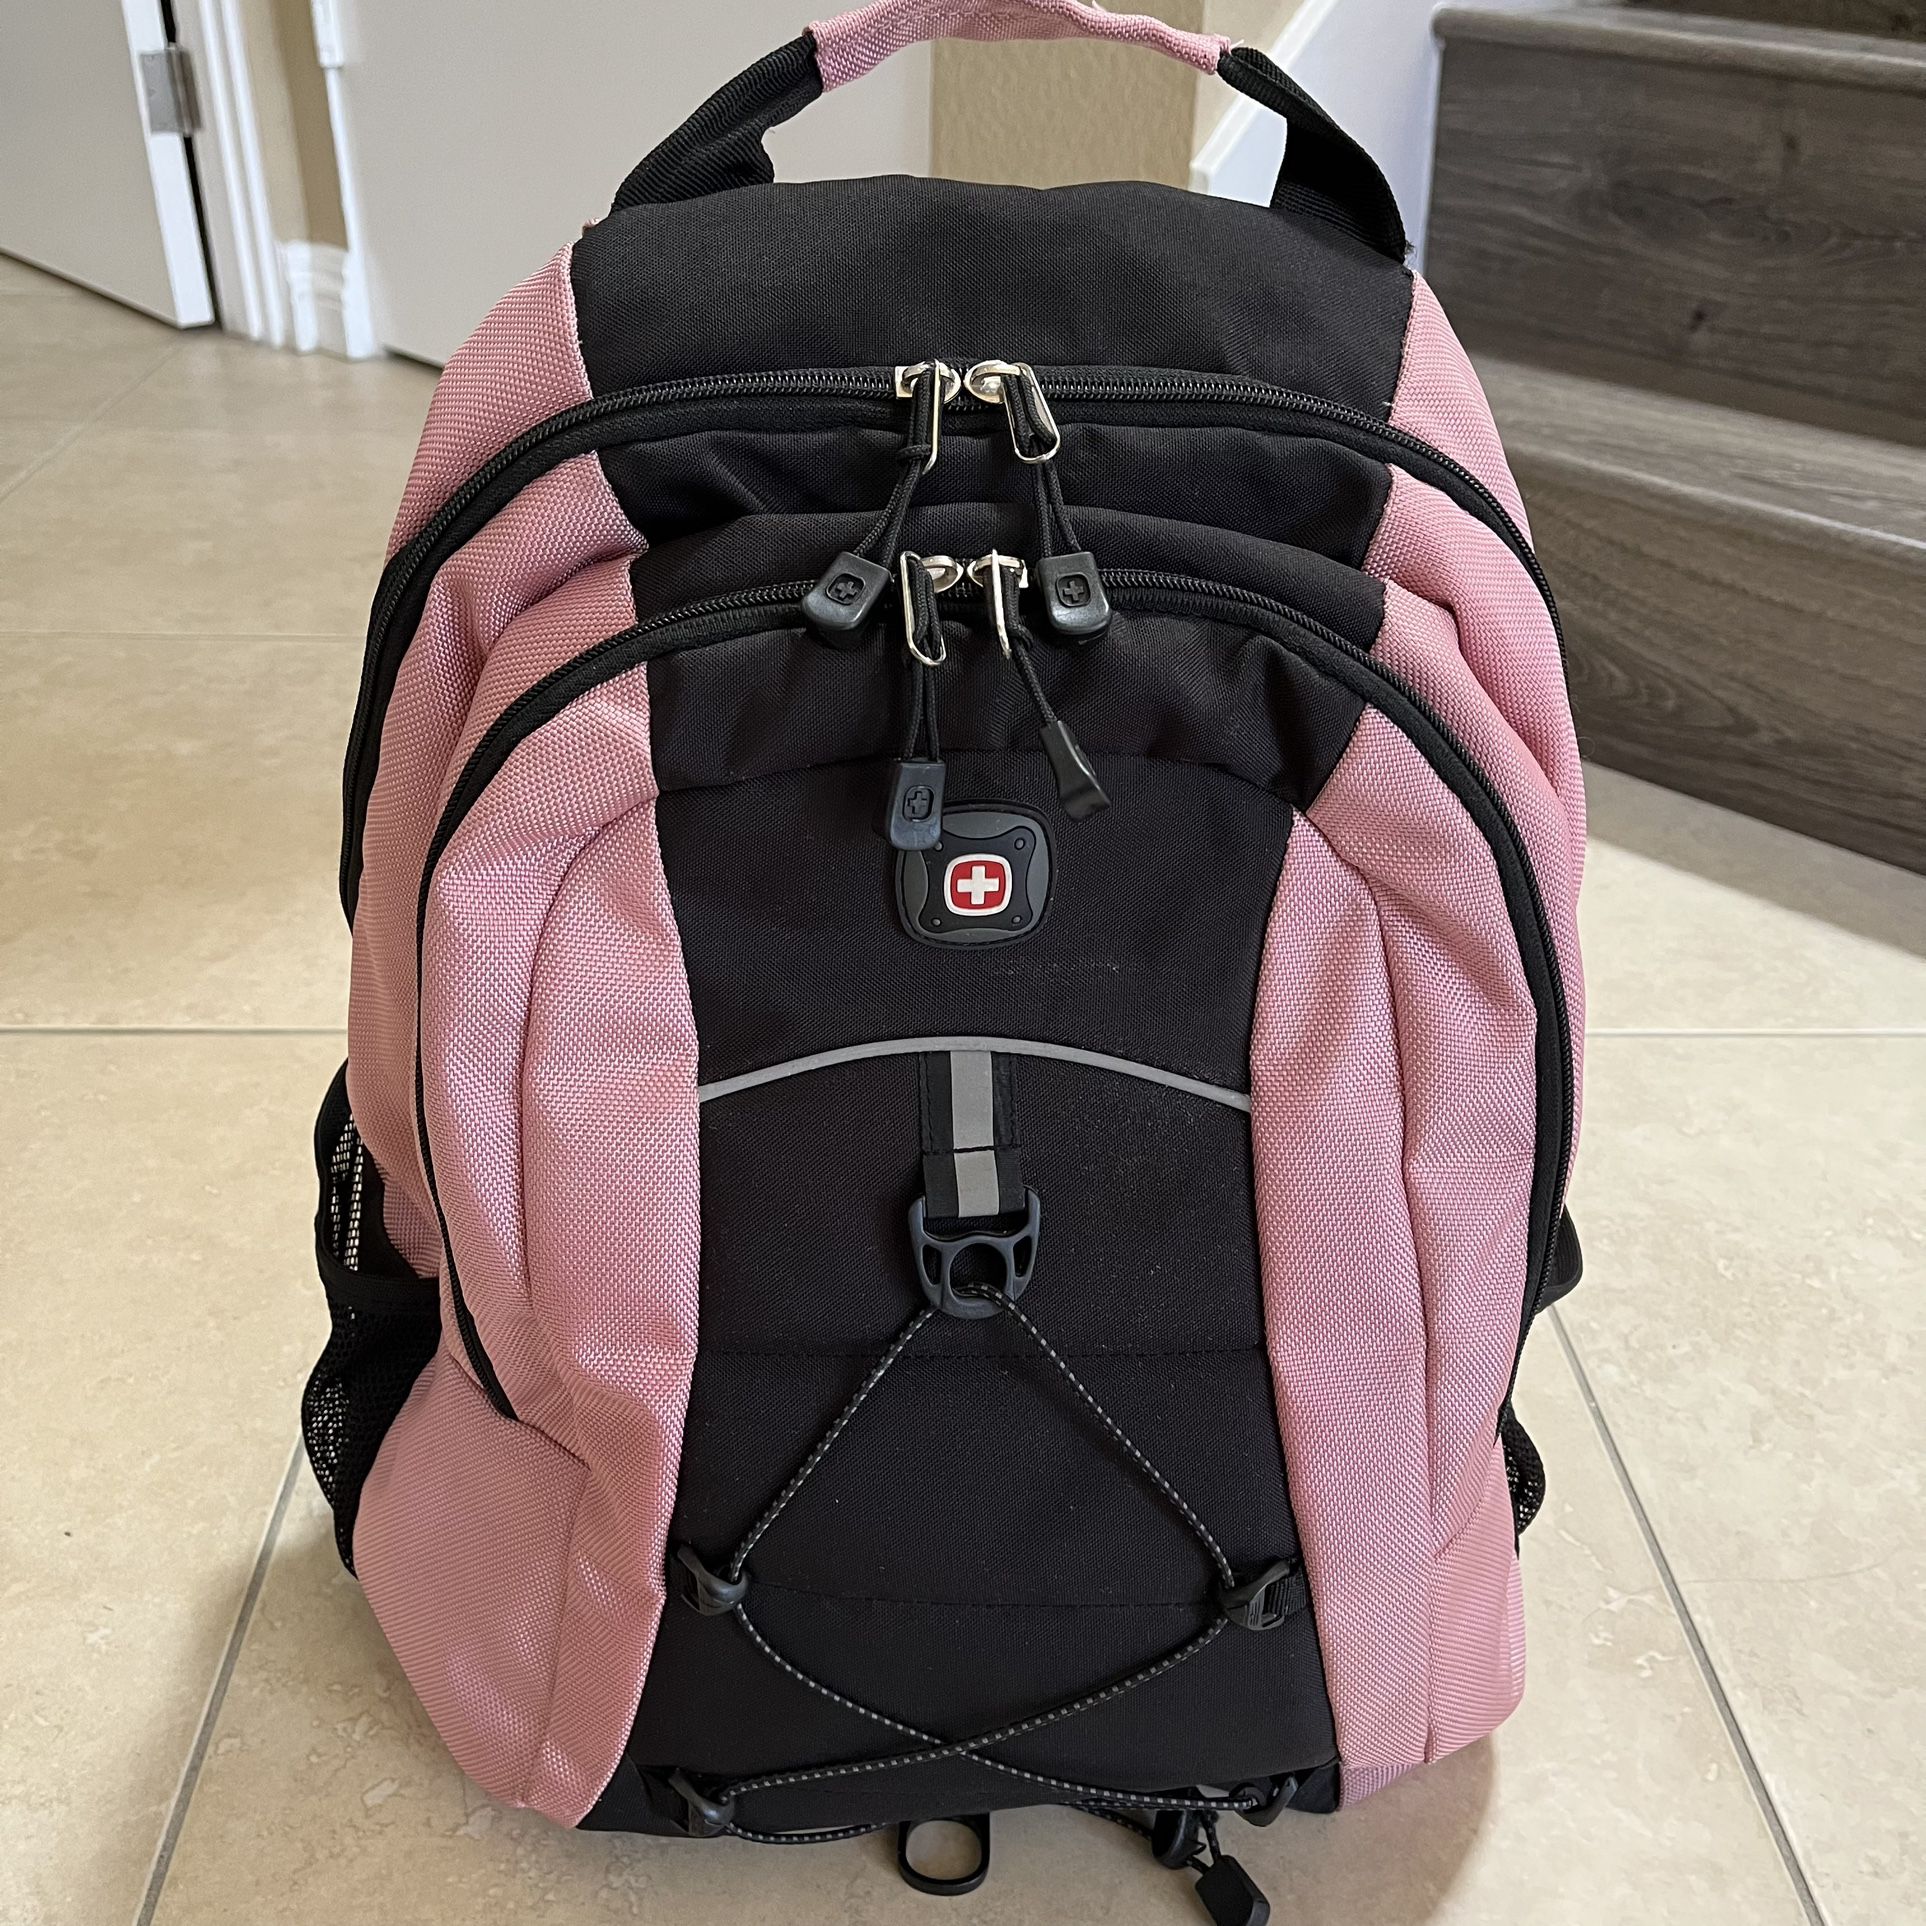 Swiss Gear Laptop/Travel Backpack for Sale in San Diego, CA - OfferUp